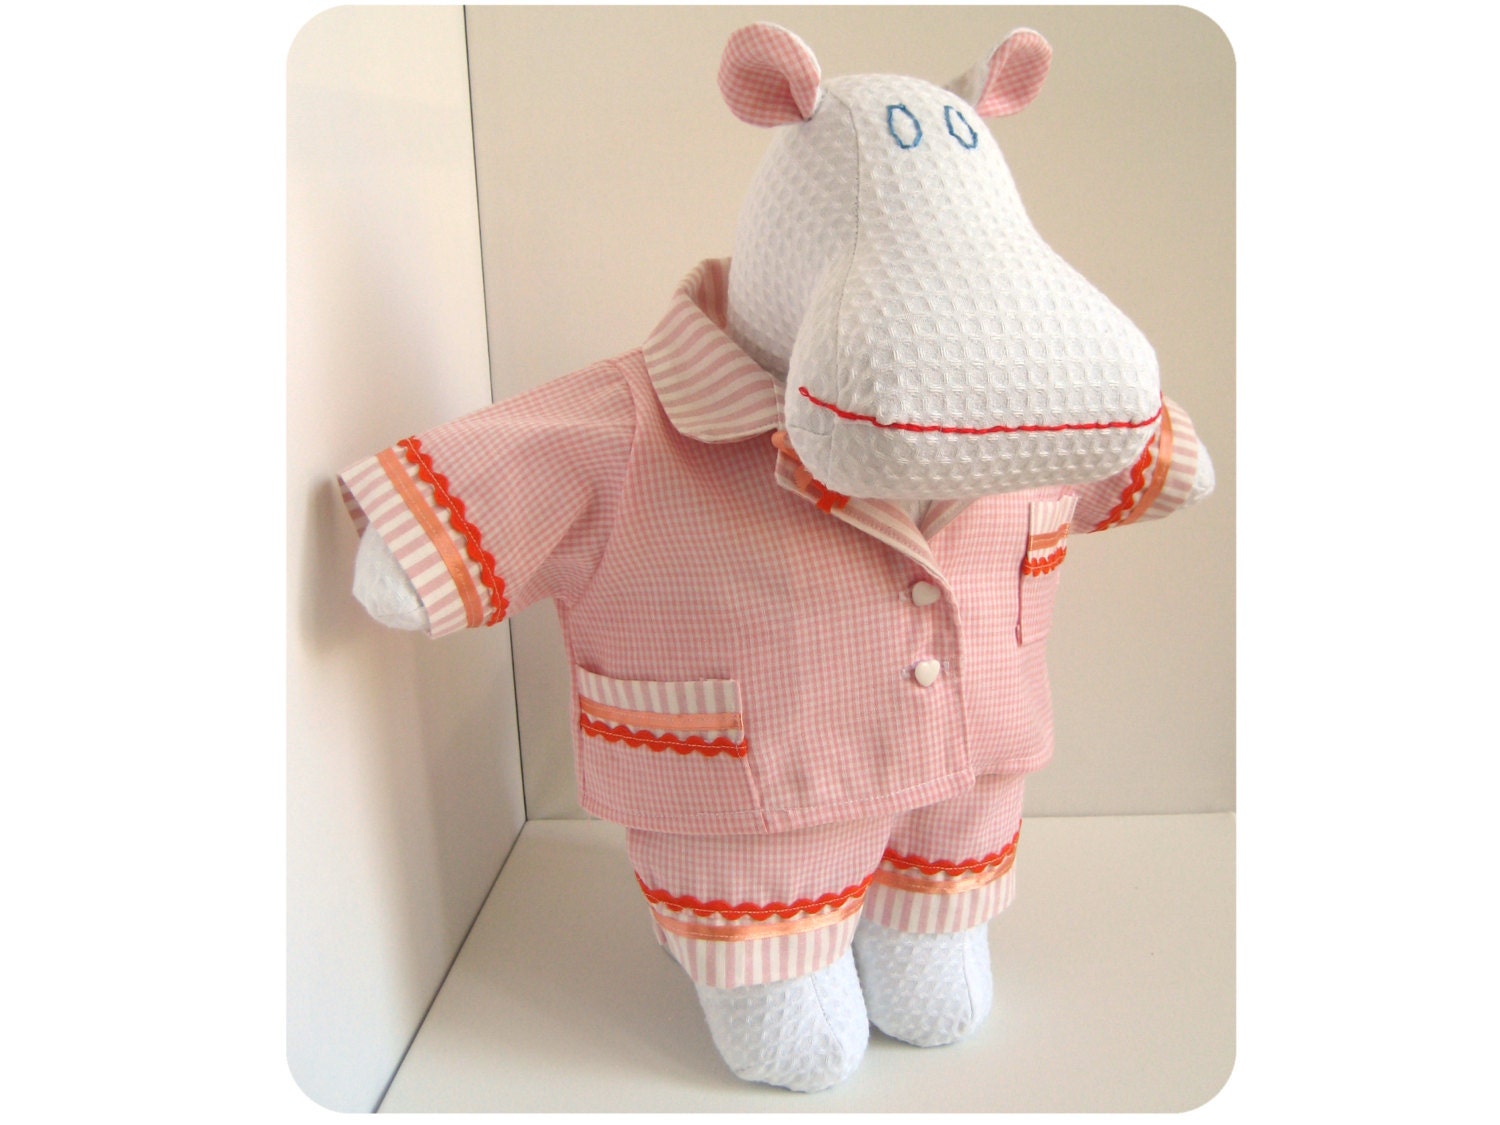 Stuffed animal hippo - Soft doll - Handmade toy for girl - Unique white plush hippo in pjs - Kids toy - Modern toy - Molly the Mippo - Mippoos